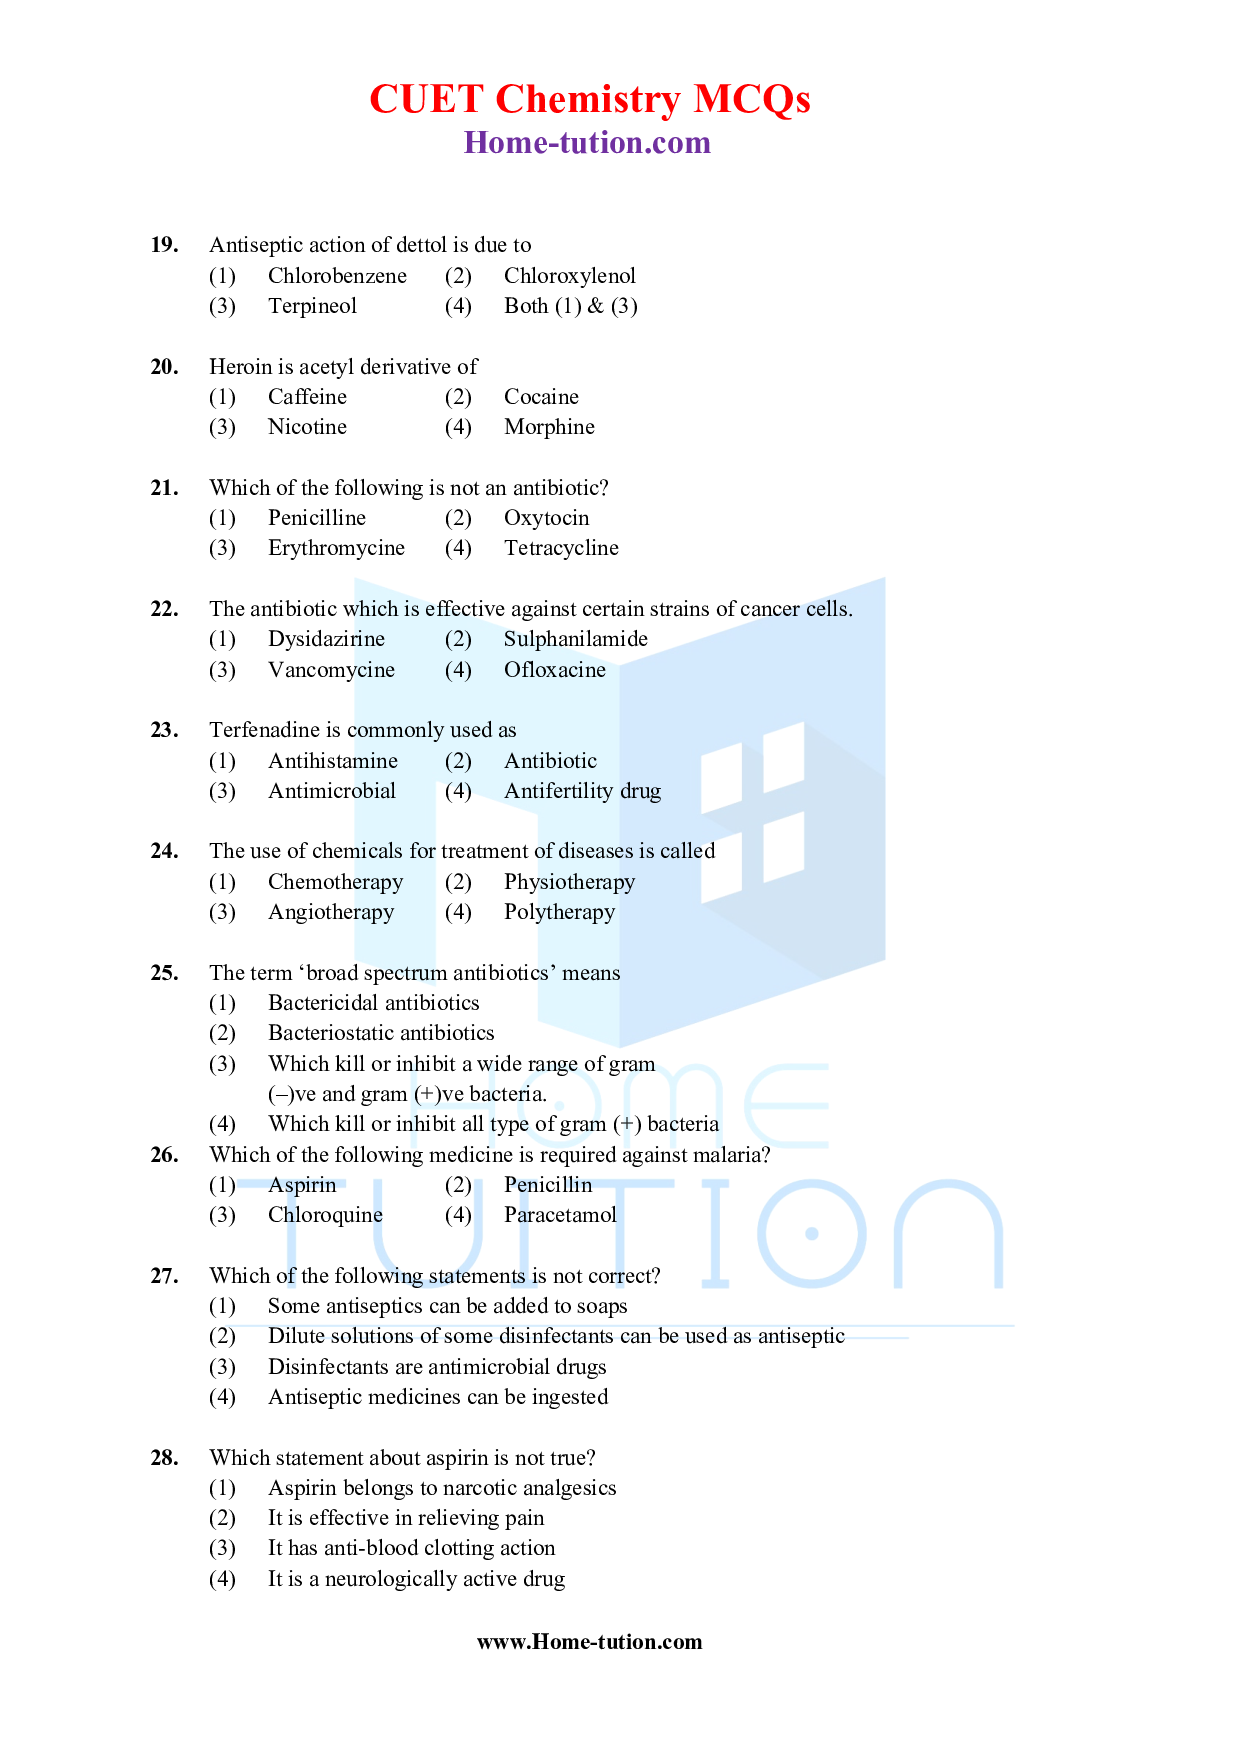 CUET MCQ Questions For Chapter-16 Chemistry in Everyday Life